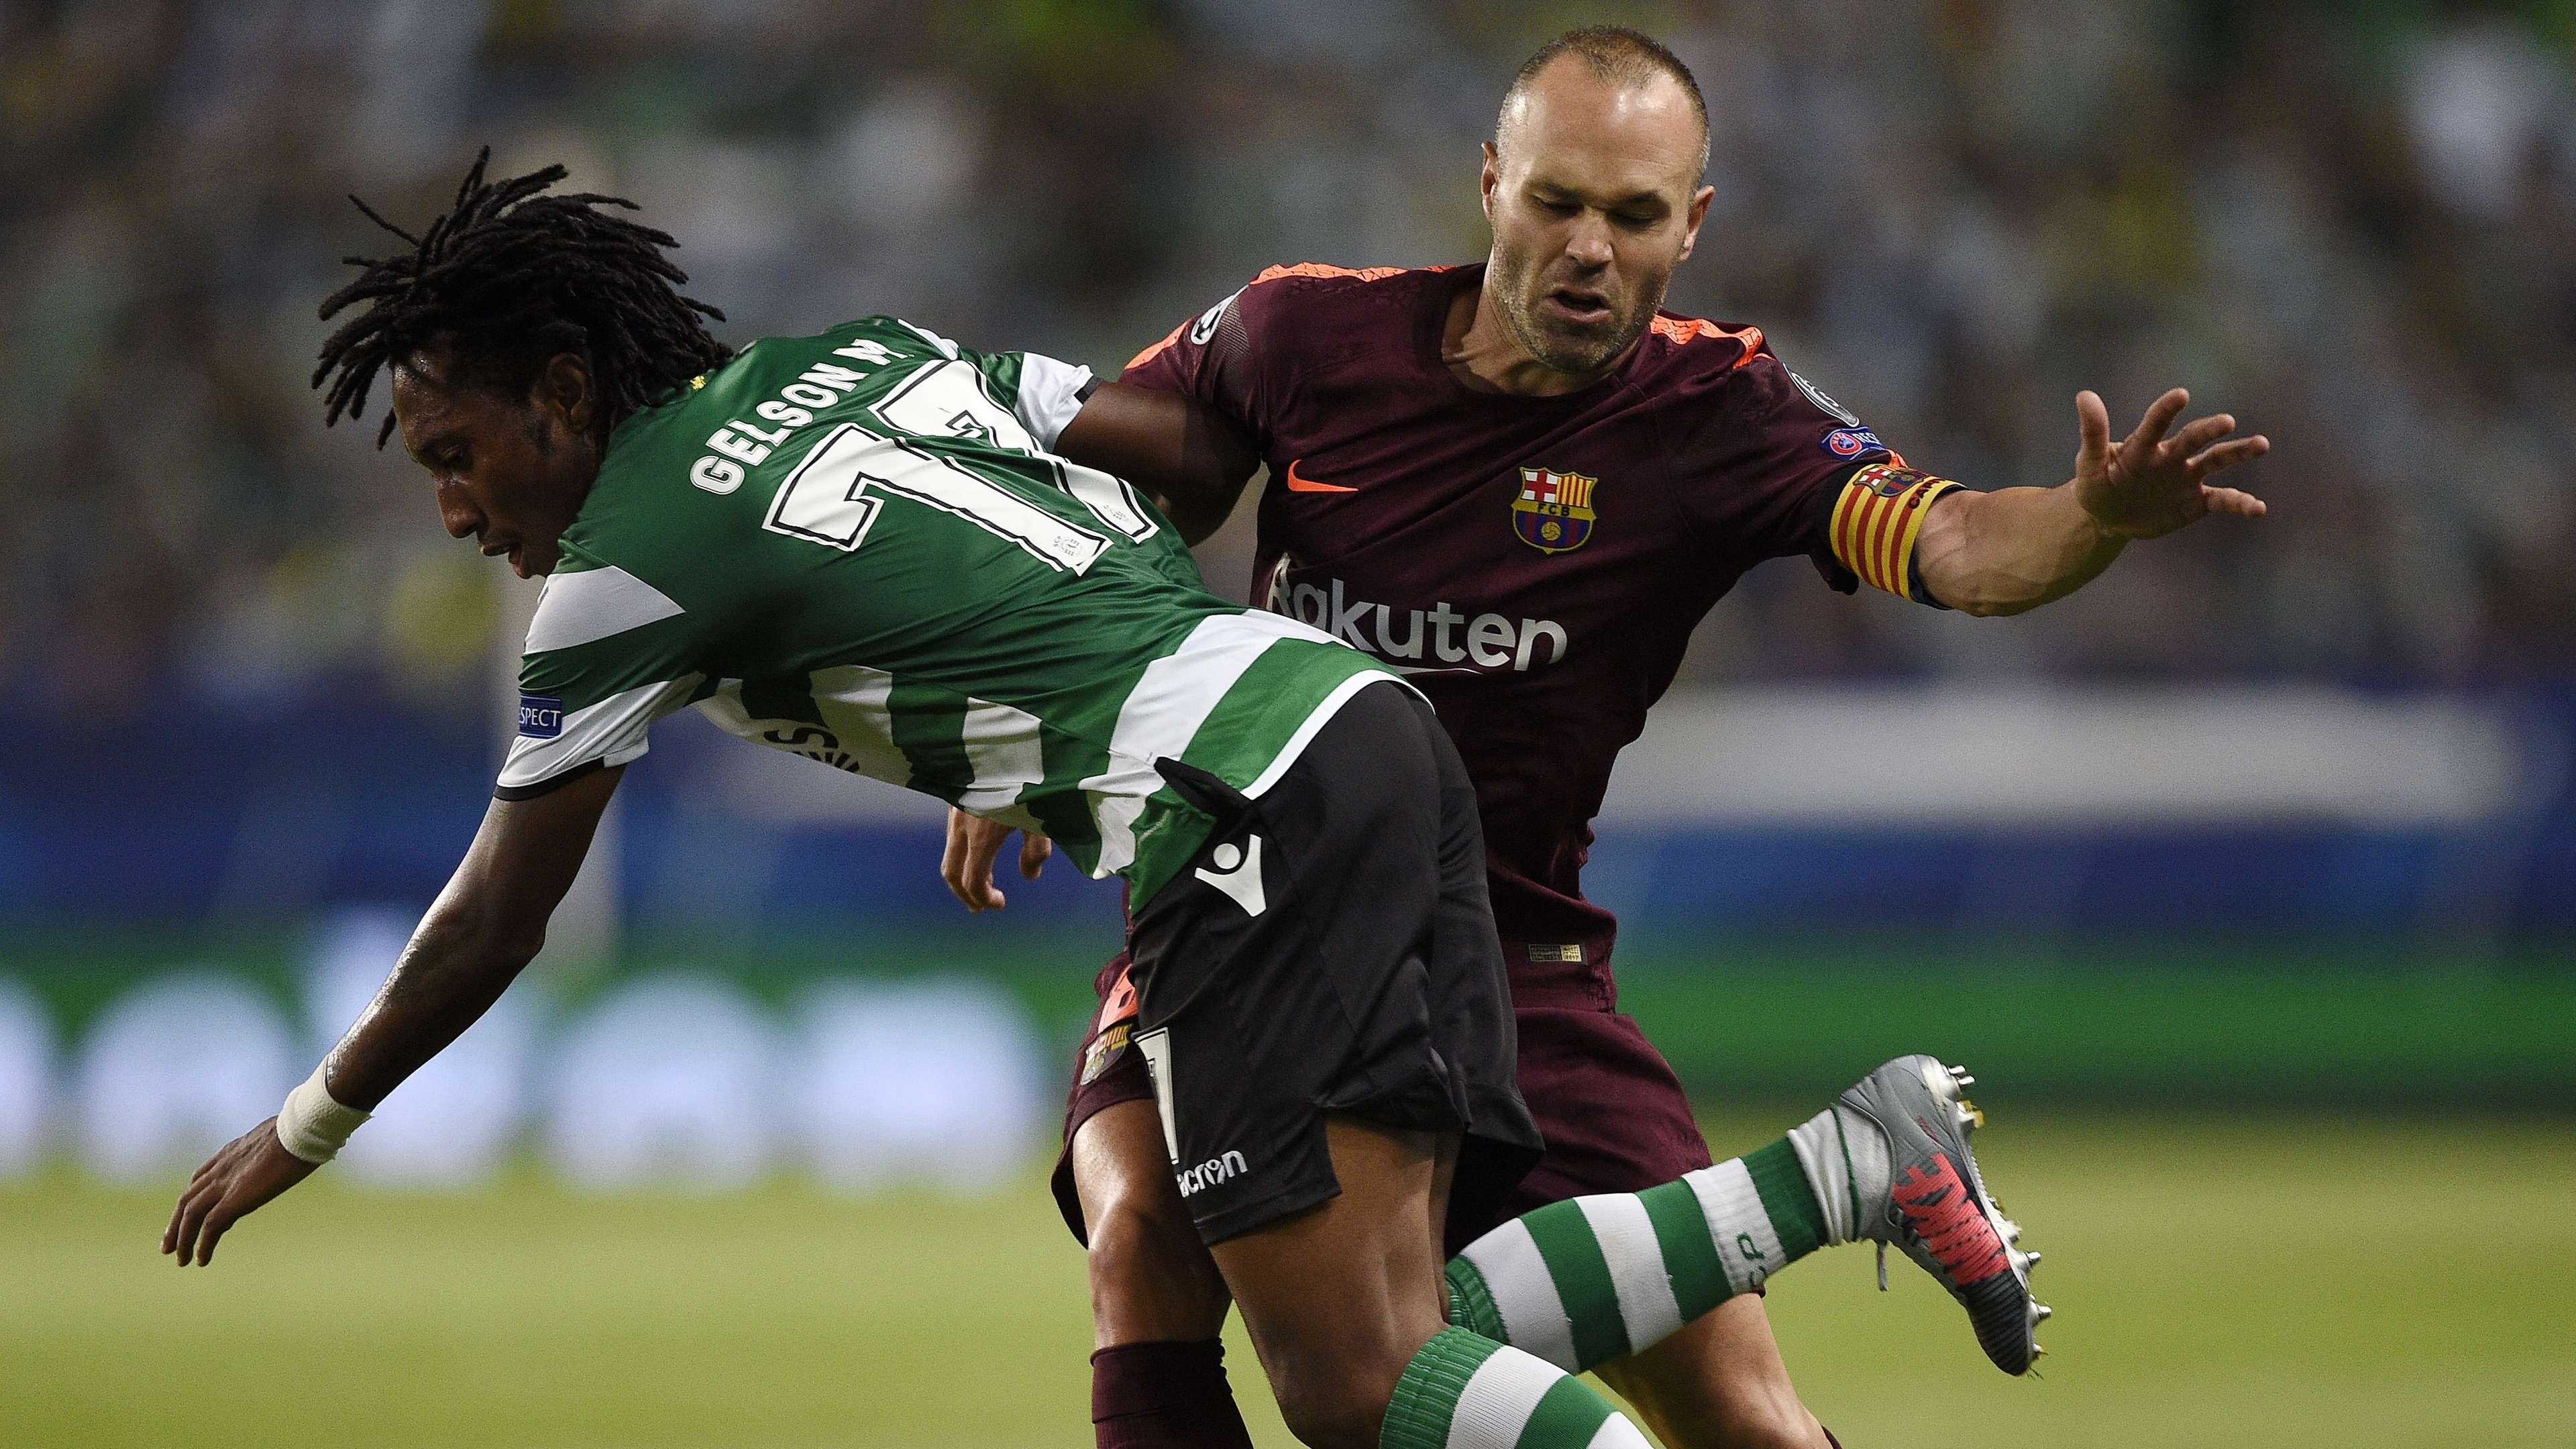 Gelson Martins Andres Iniesta Sporting CP Barcelona UCL 27092017